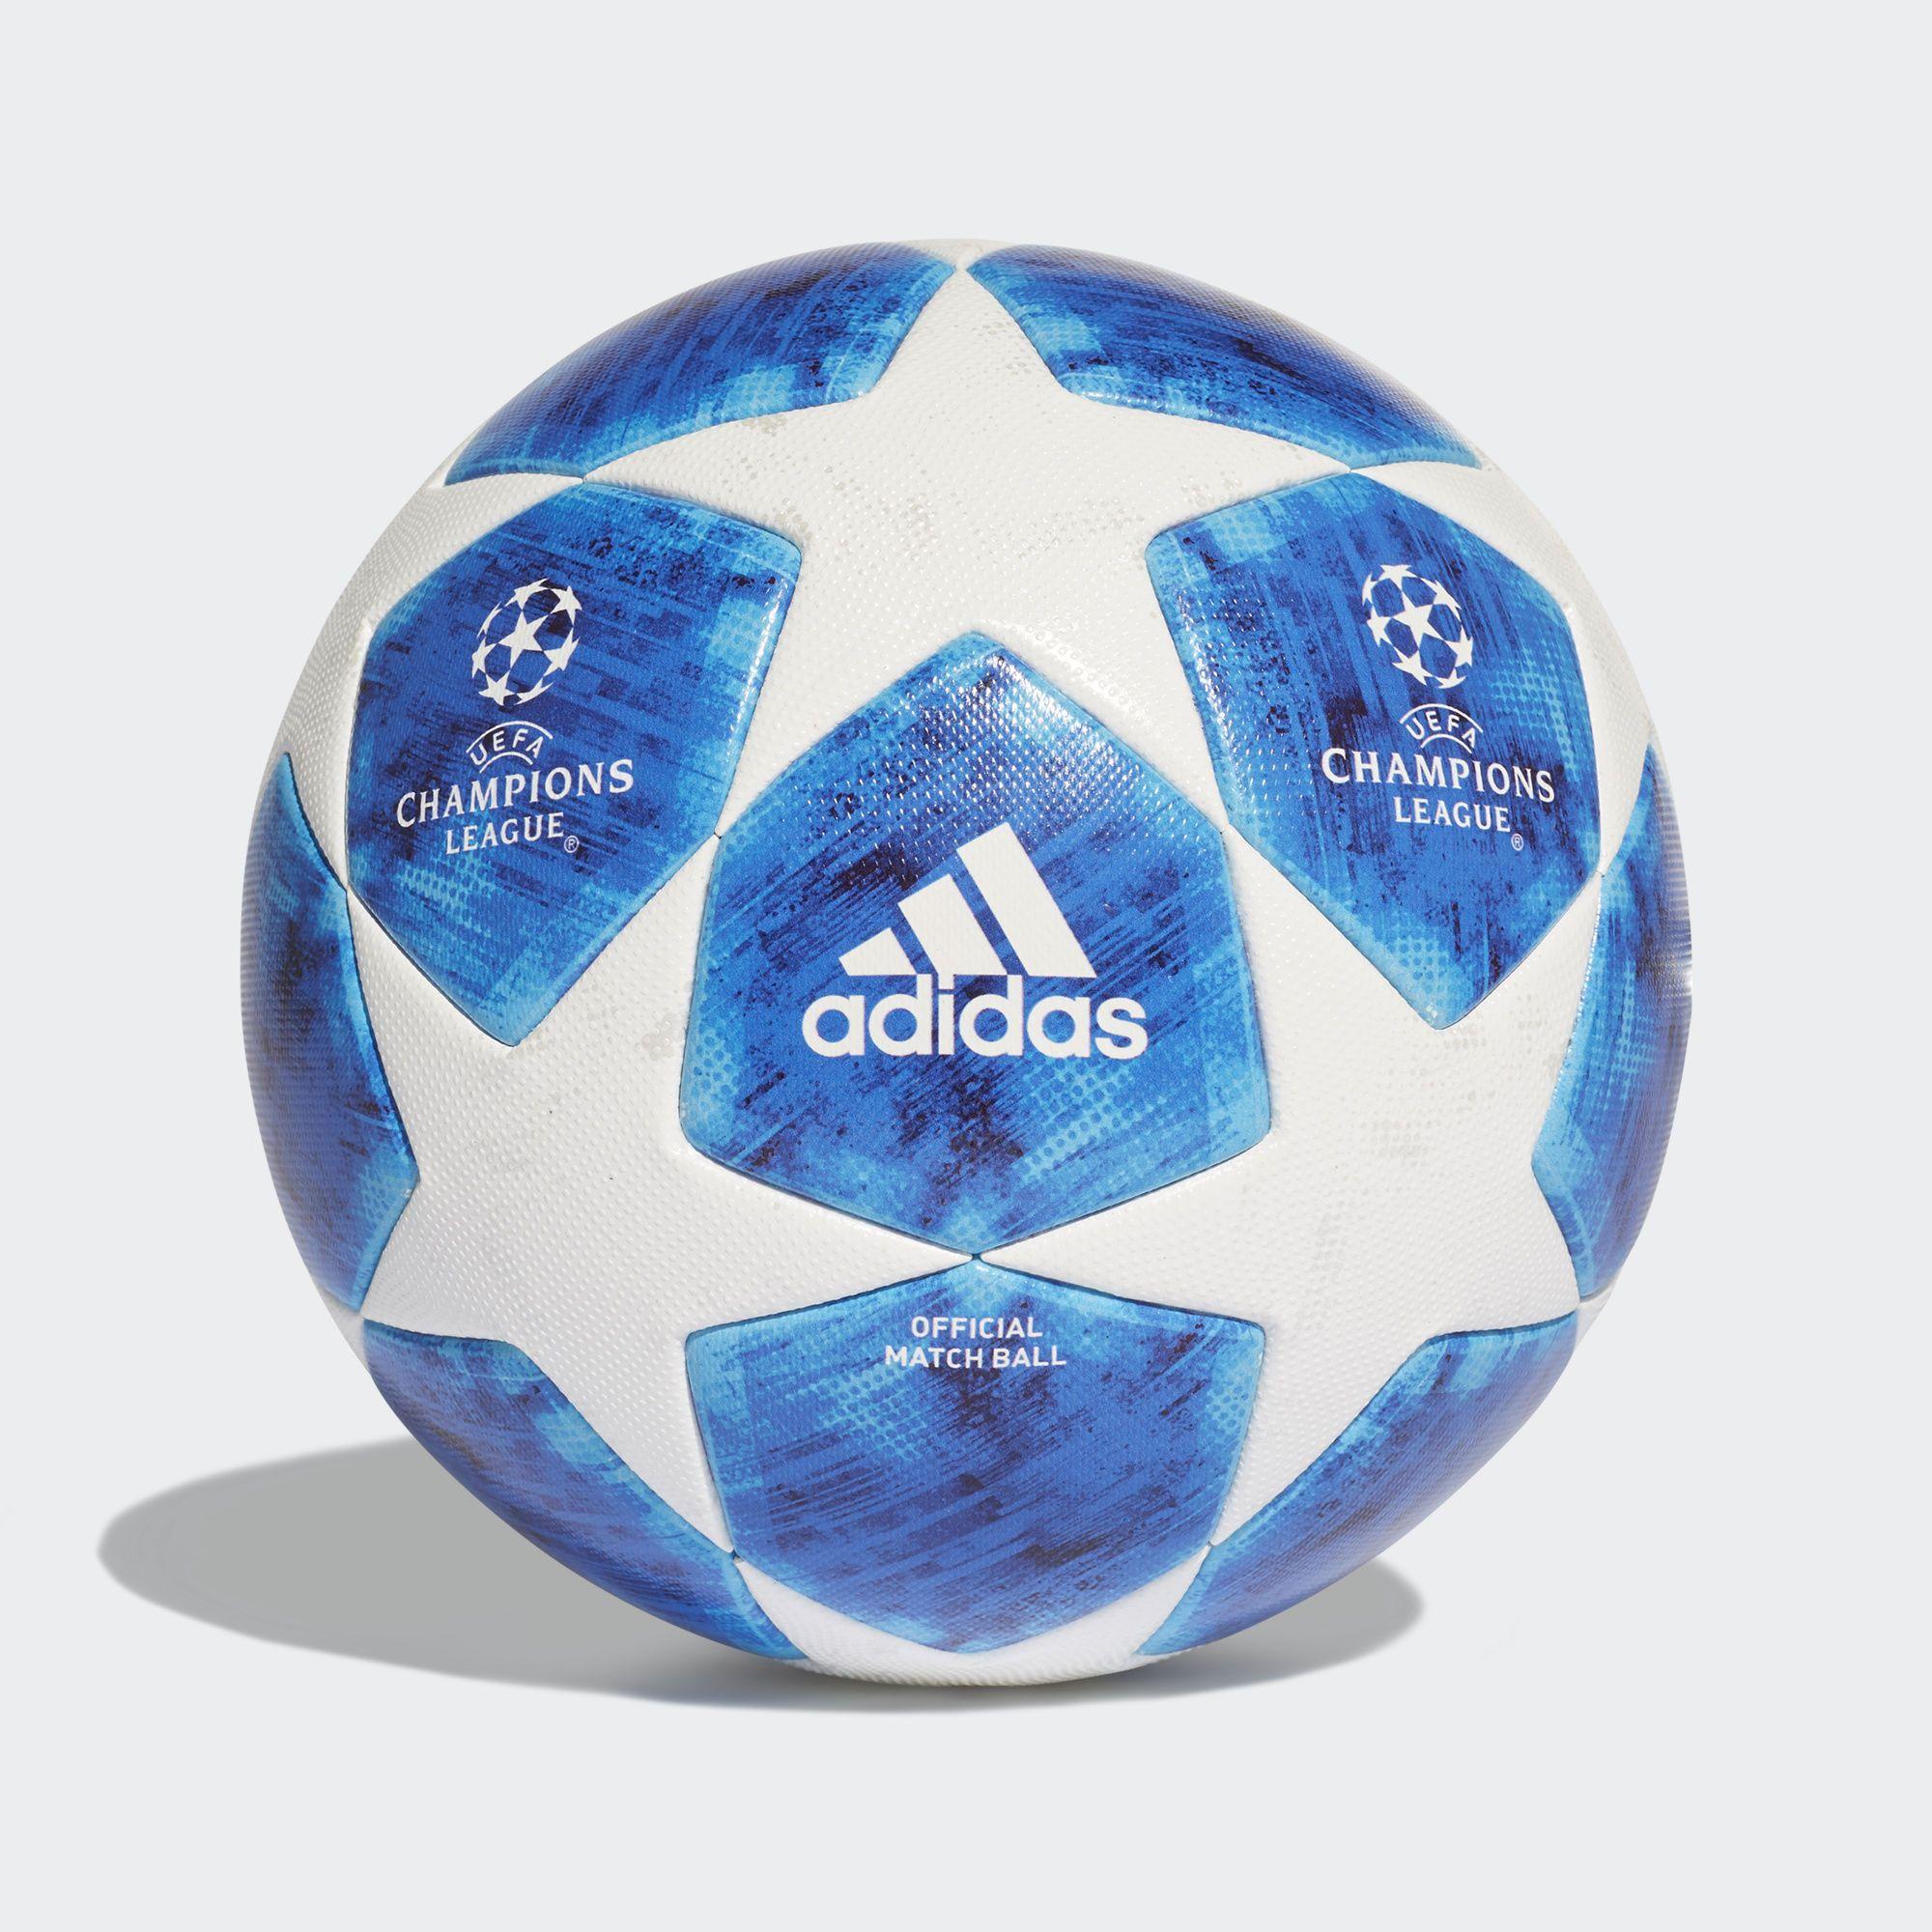 Blue and White Football Logo - adidas Finale 18 Official Match Ball